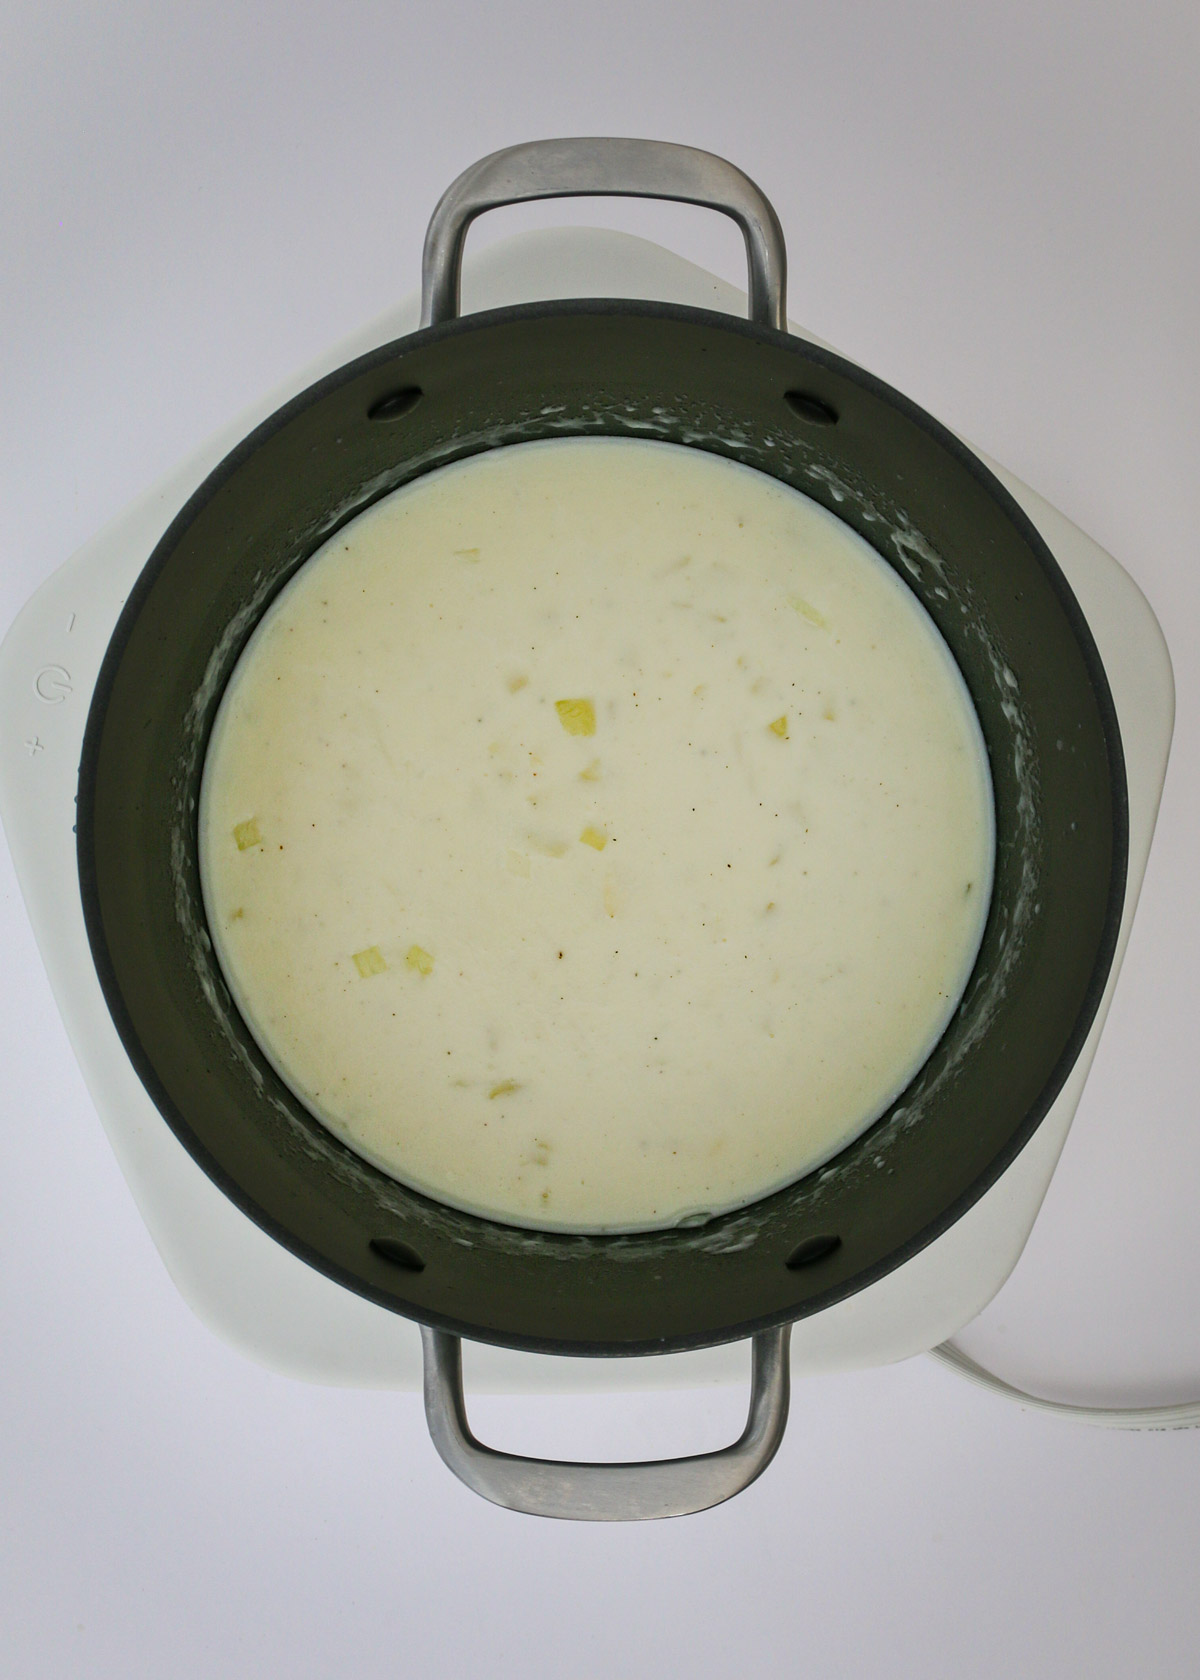 the finished white sauce in the pot.